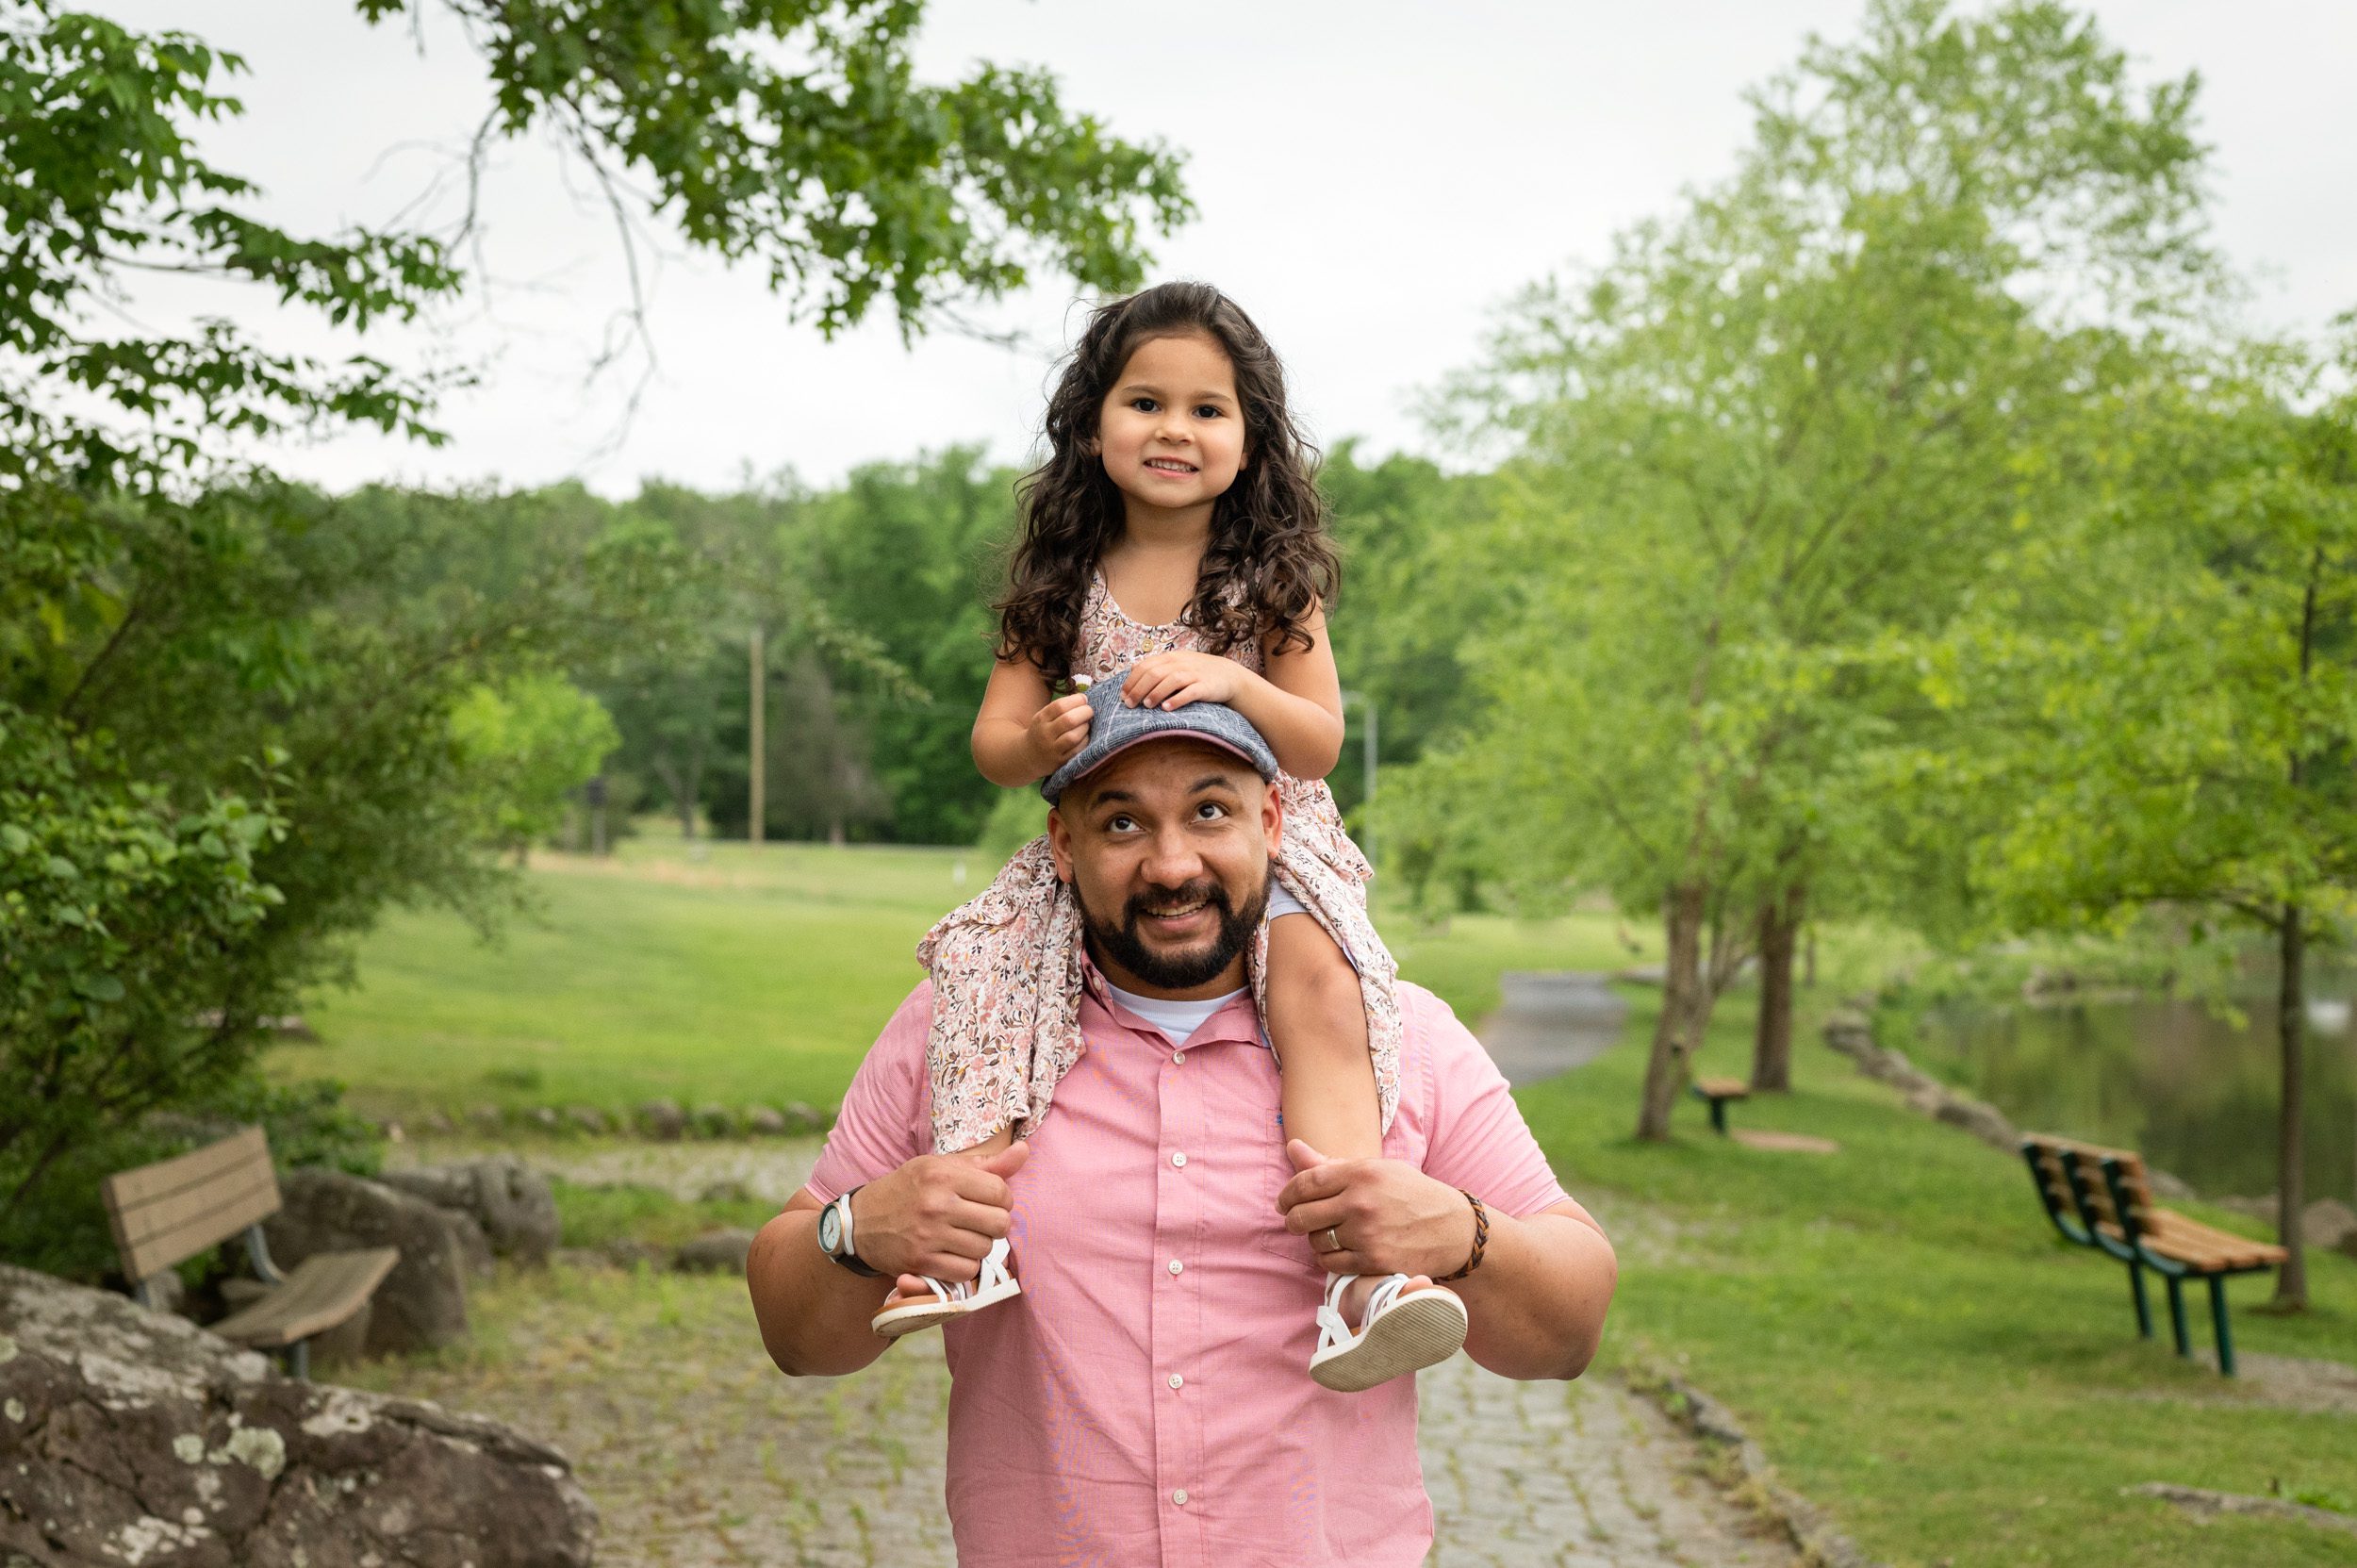 A little girl riding on her father's shoulders as he smiles up at her during a family photo session